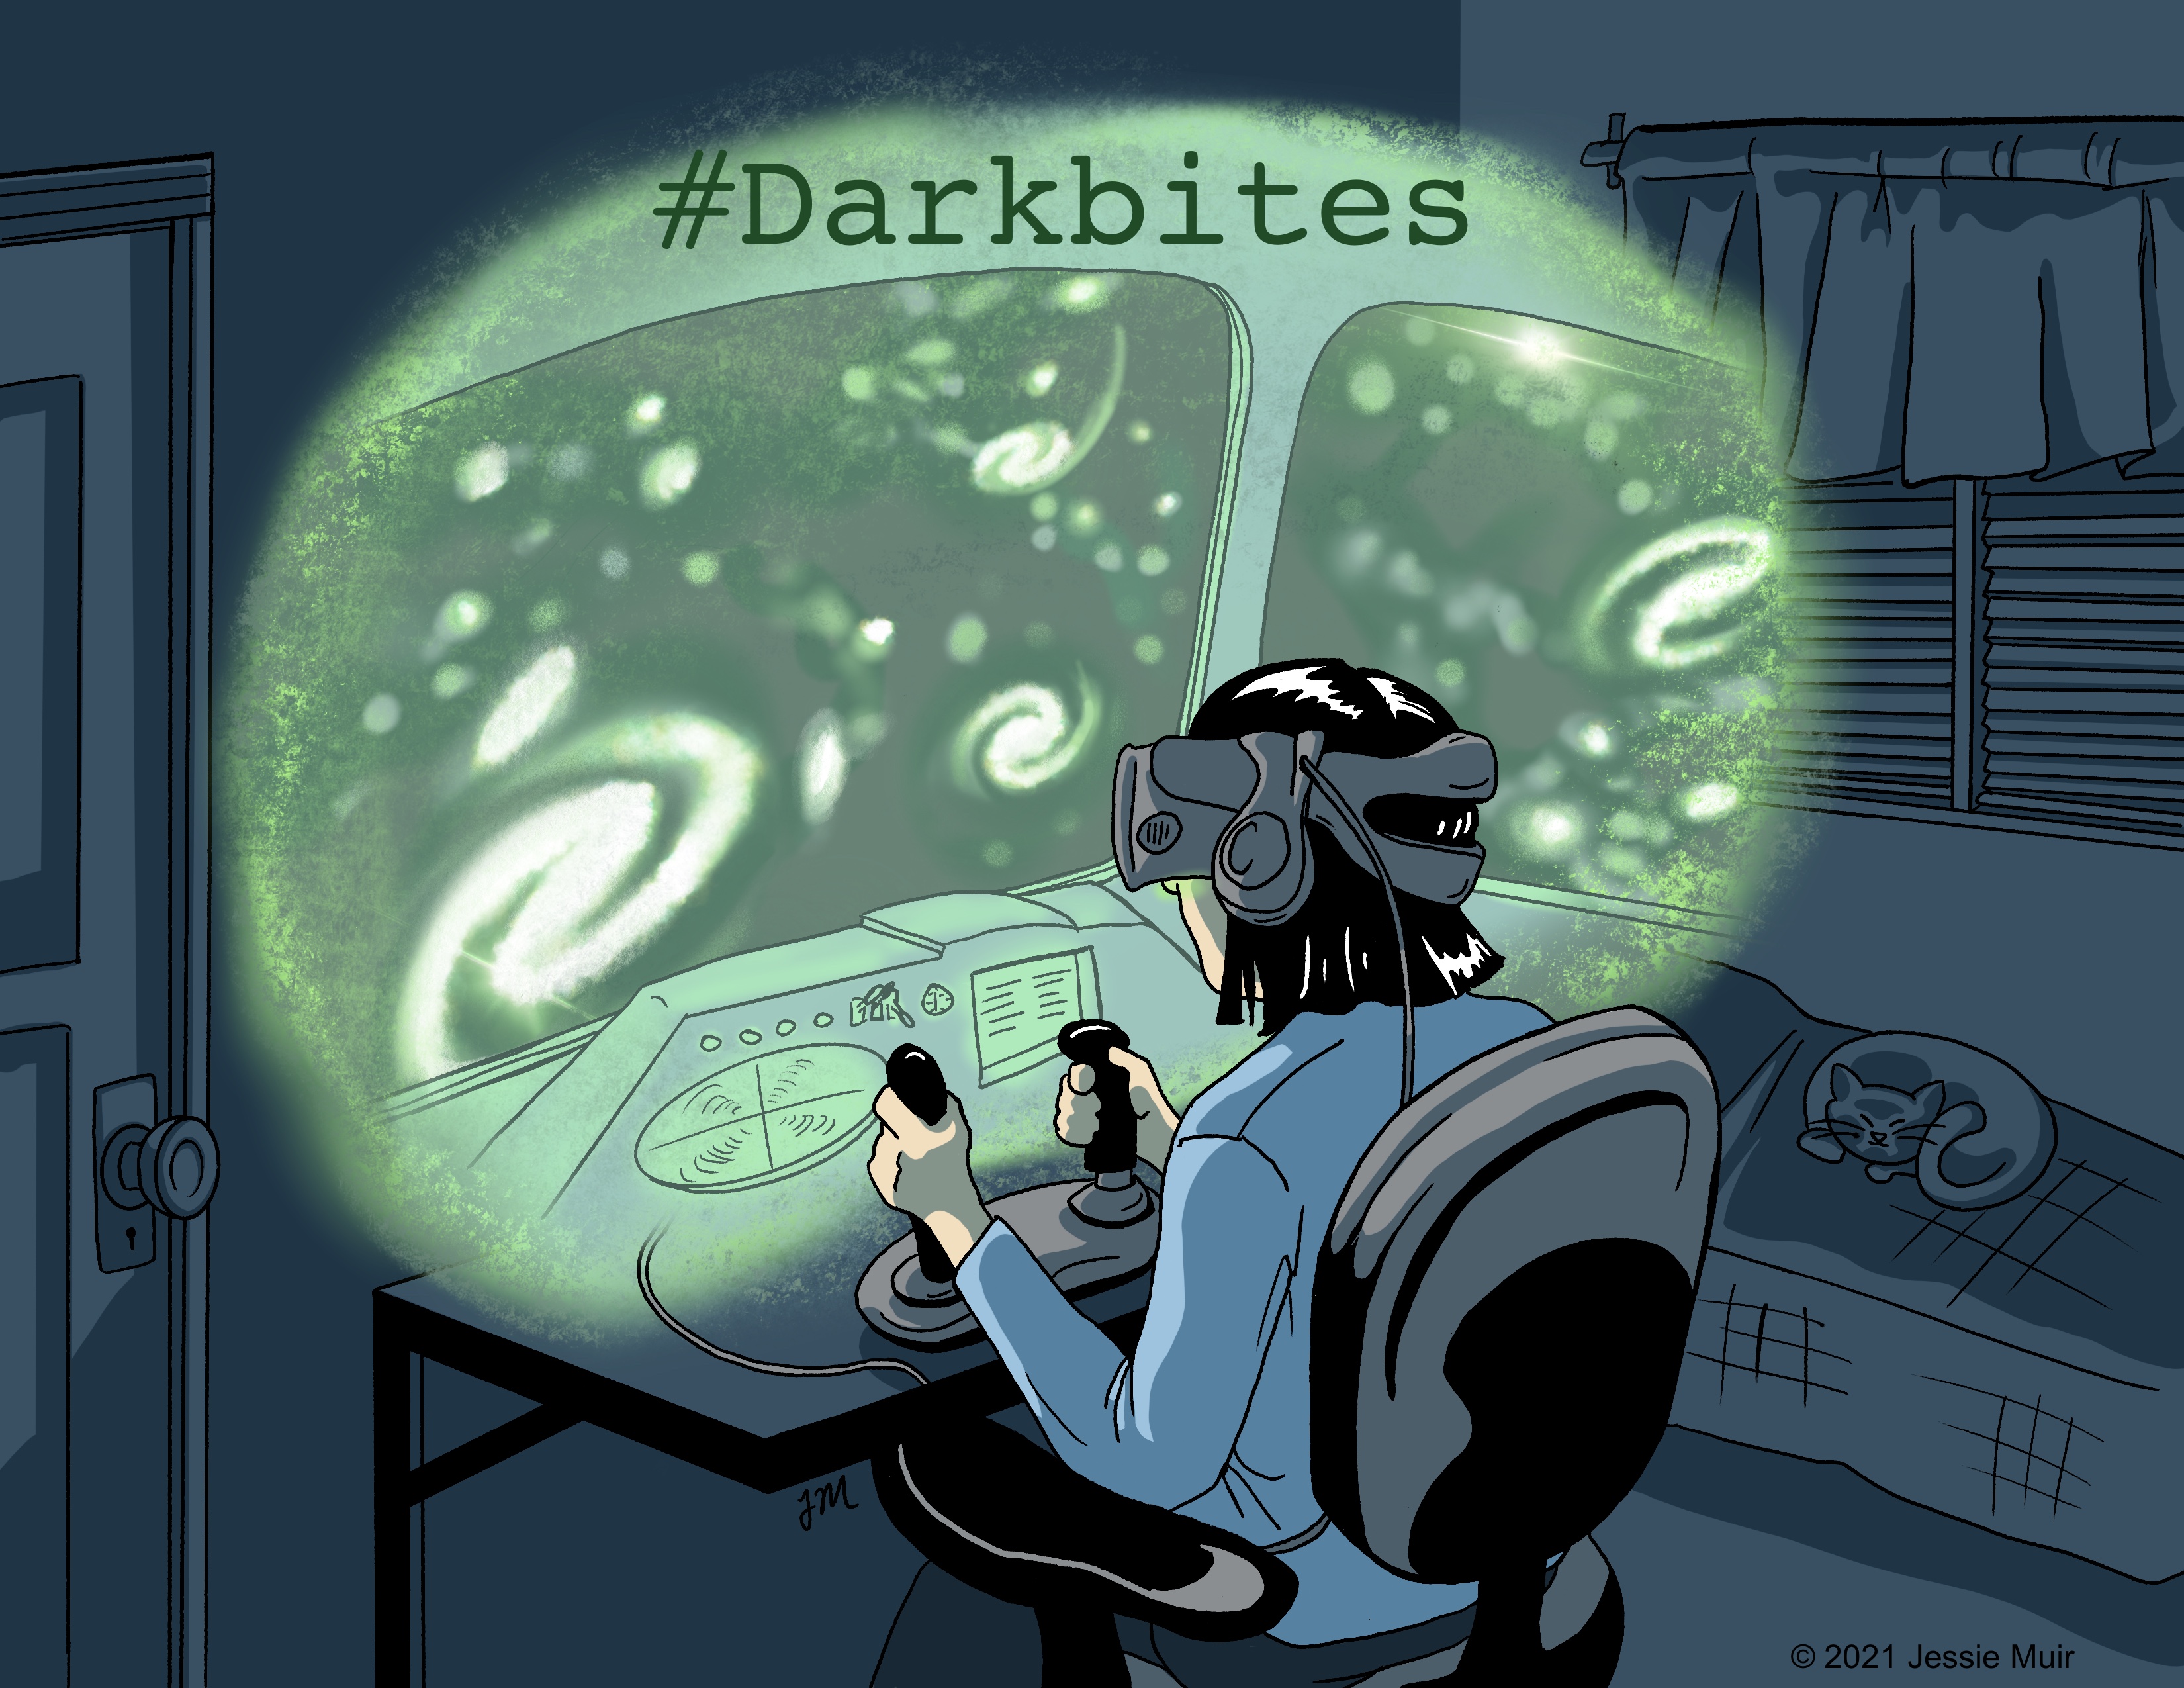 alt="Cartoon of a person operating a flight simulator with a virtual reality headset. A greenish glowing cloud in front of their face shows what they see on the headset: the cockpit of a plane with galaxies outside the windows."